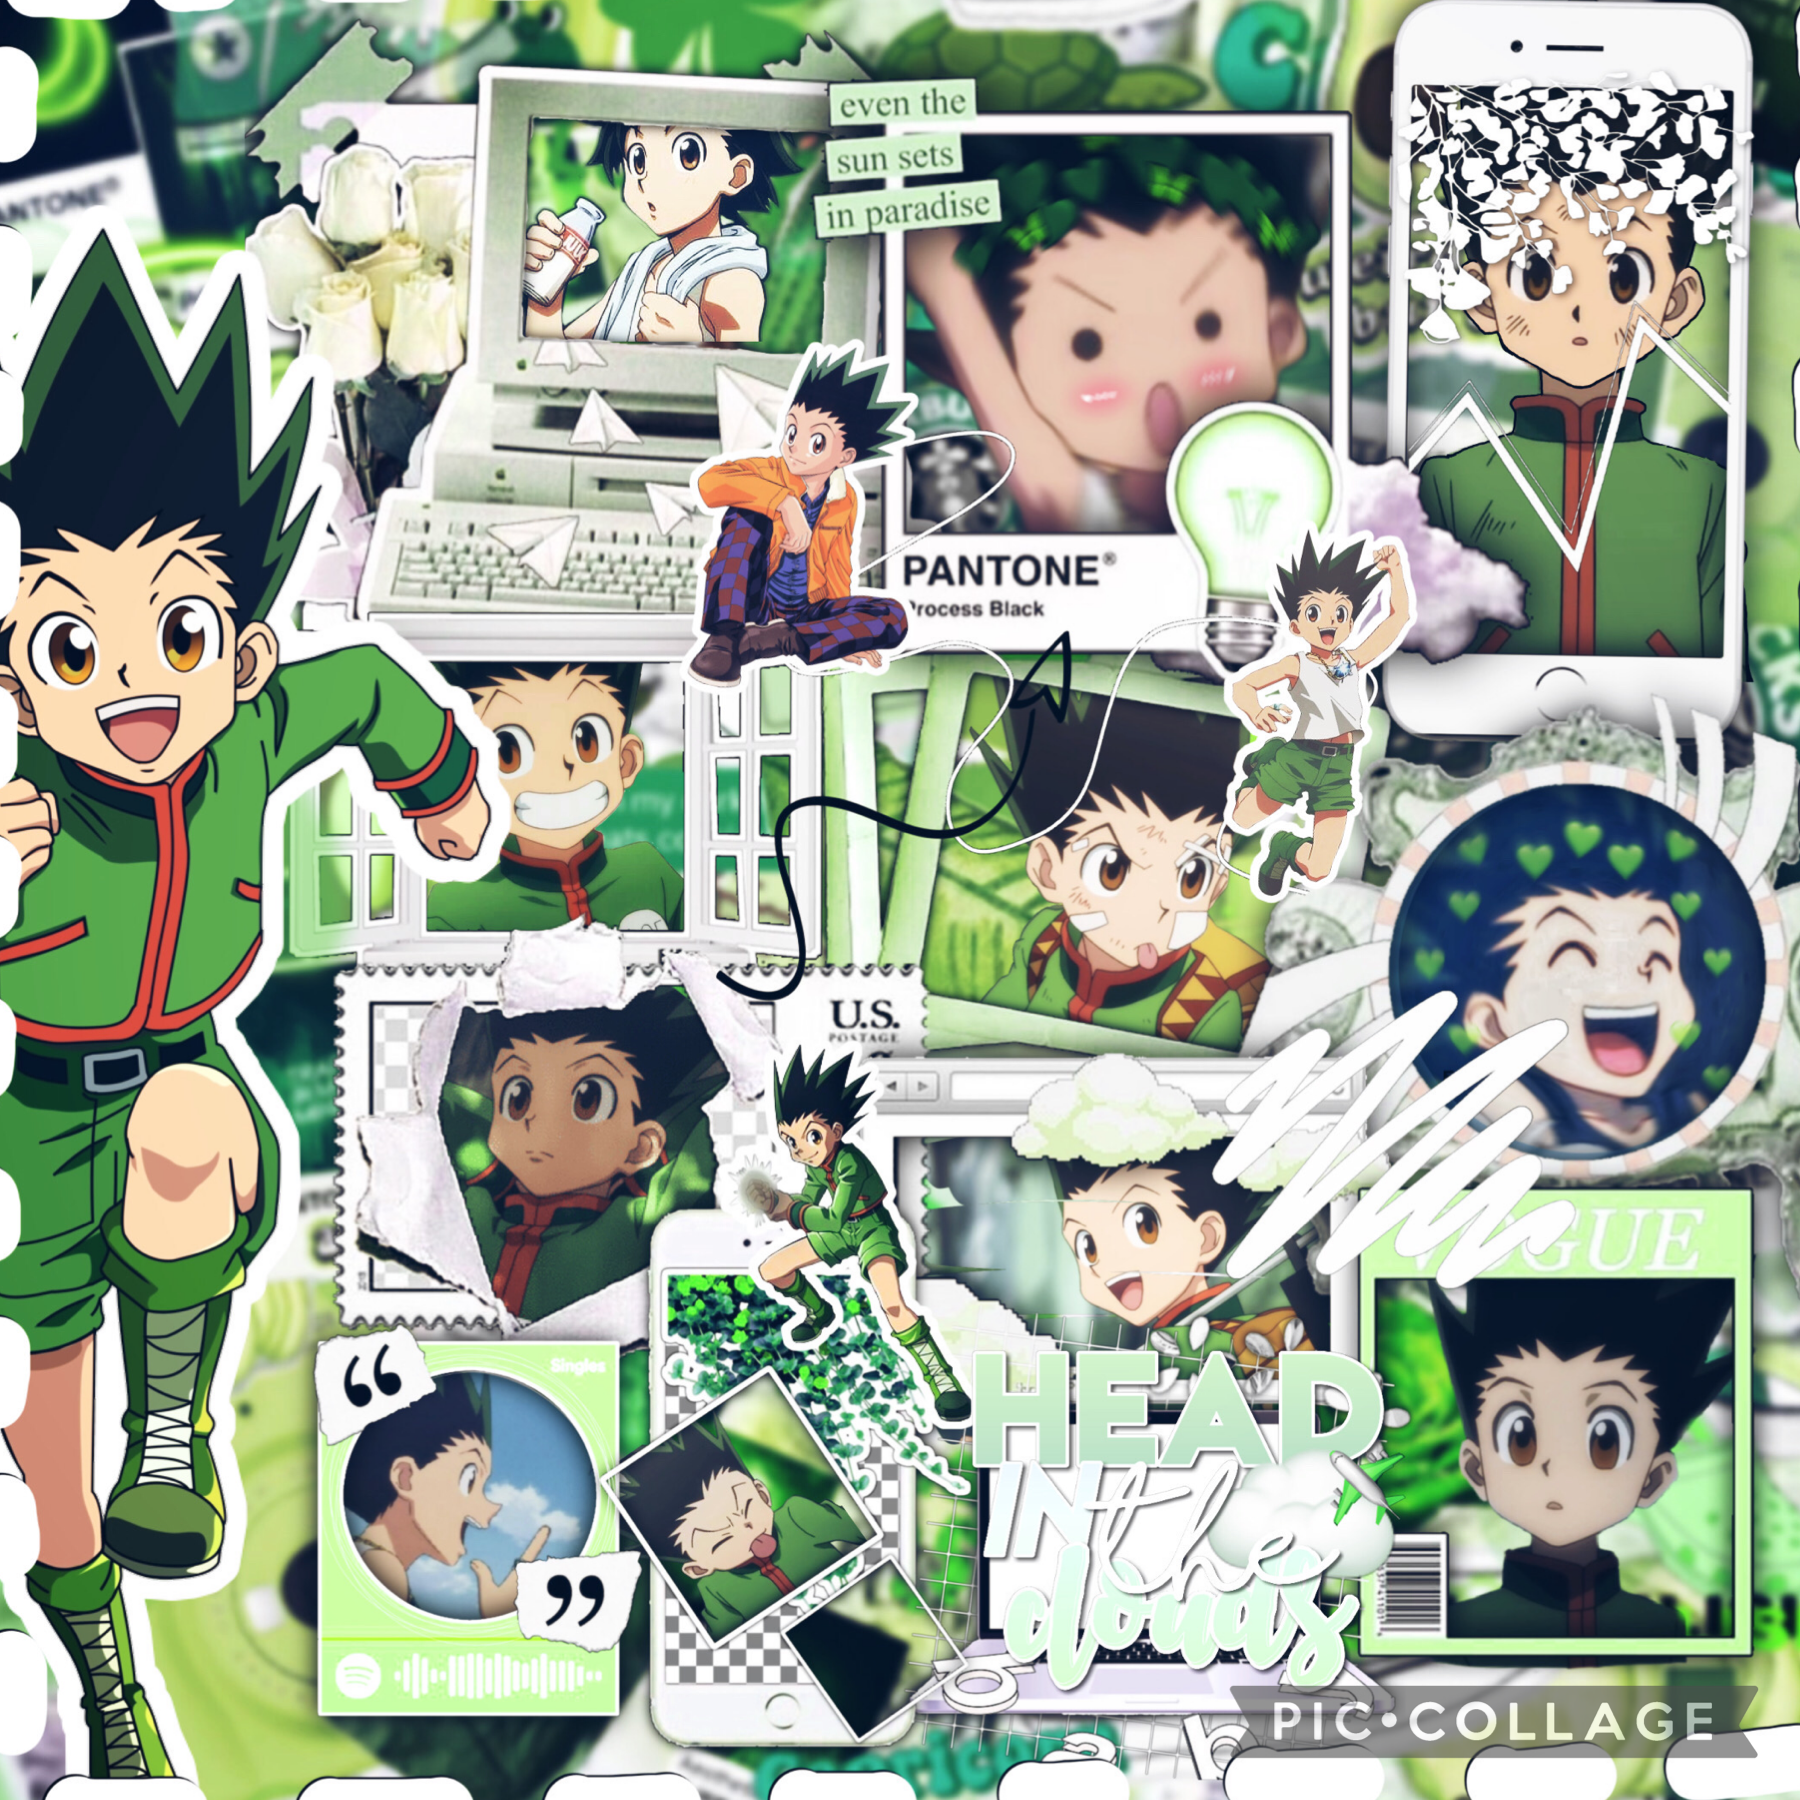 Gon collage!!